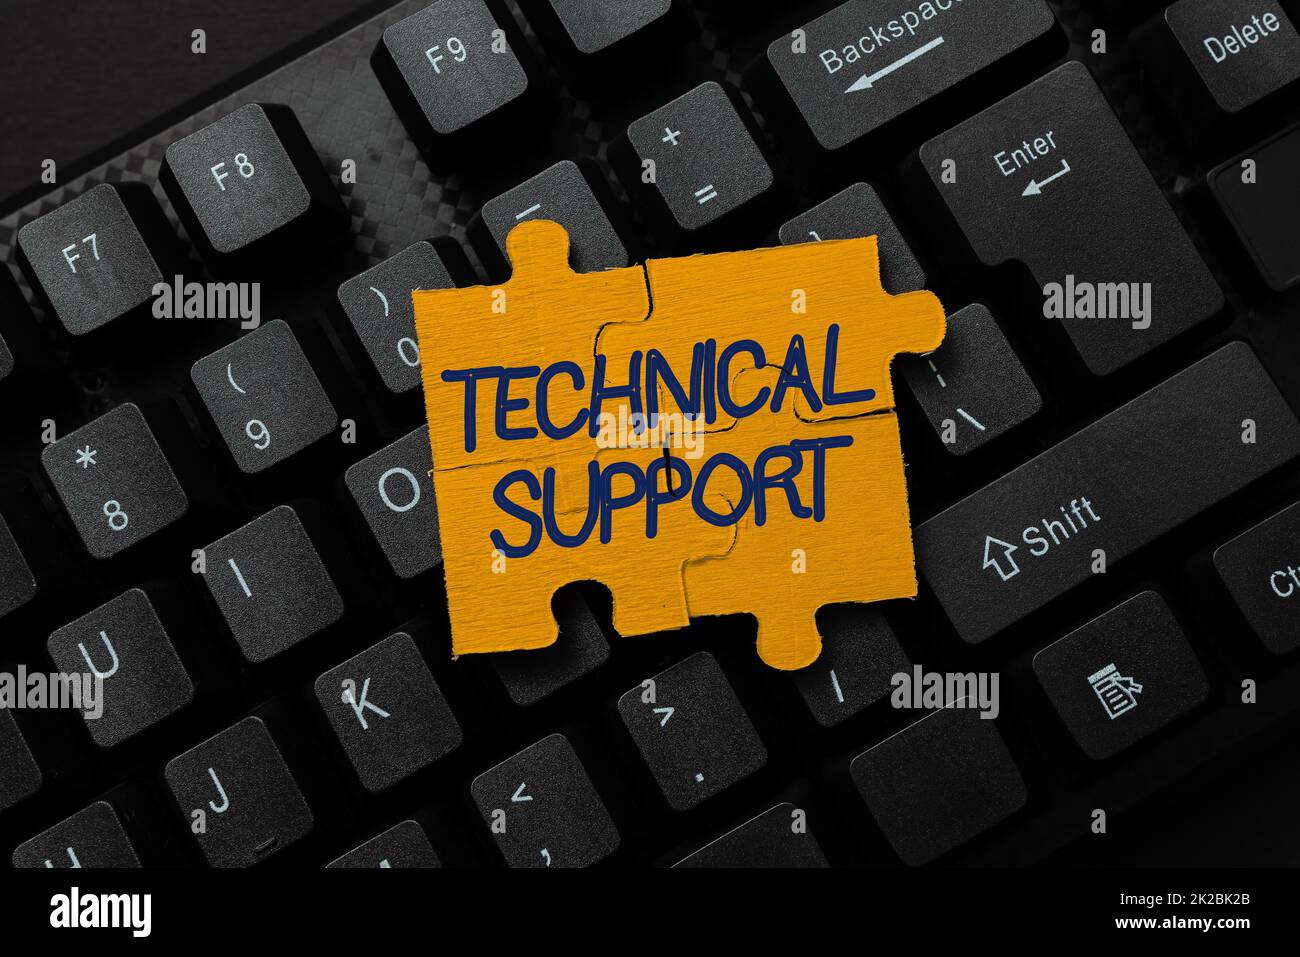 Writing displaying text Technical Support. Business overview a service provided by a hardware or software company Connecting With Online Friends, Making Acquaintances On The Internet Stock Photo